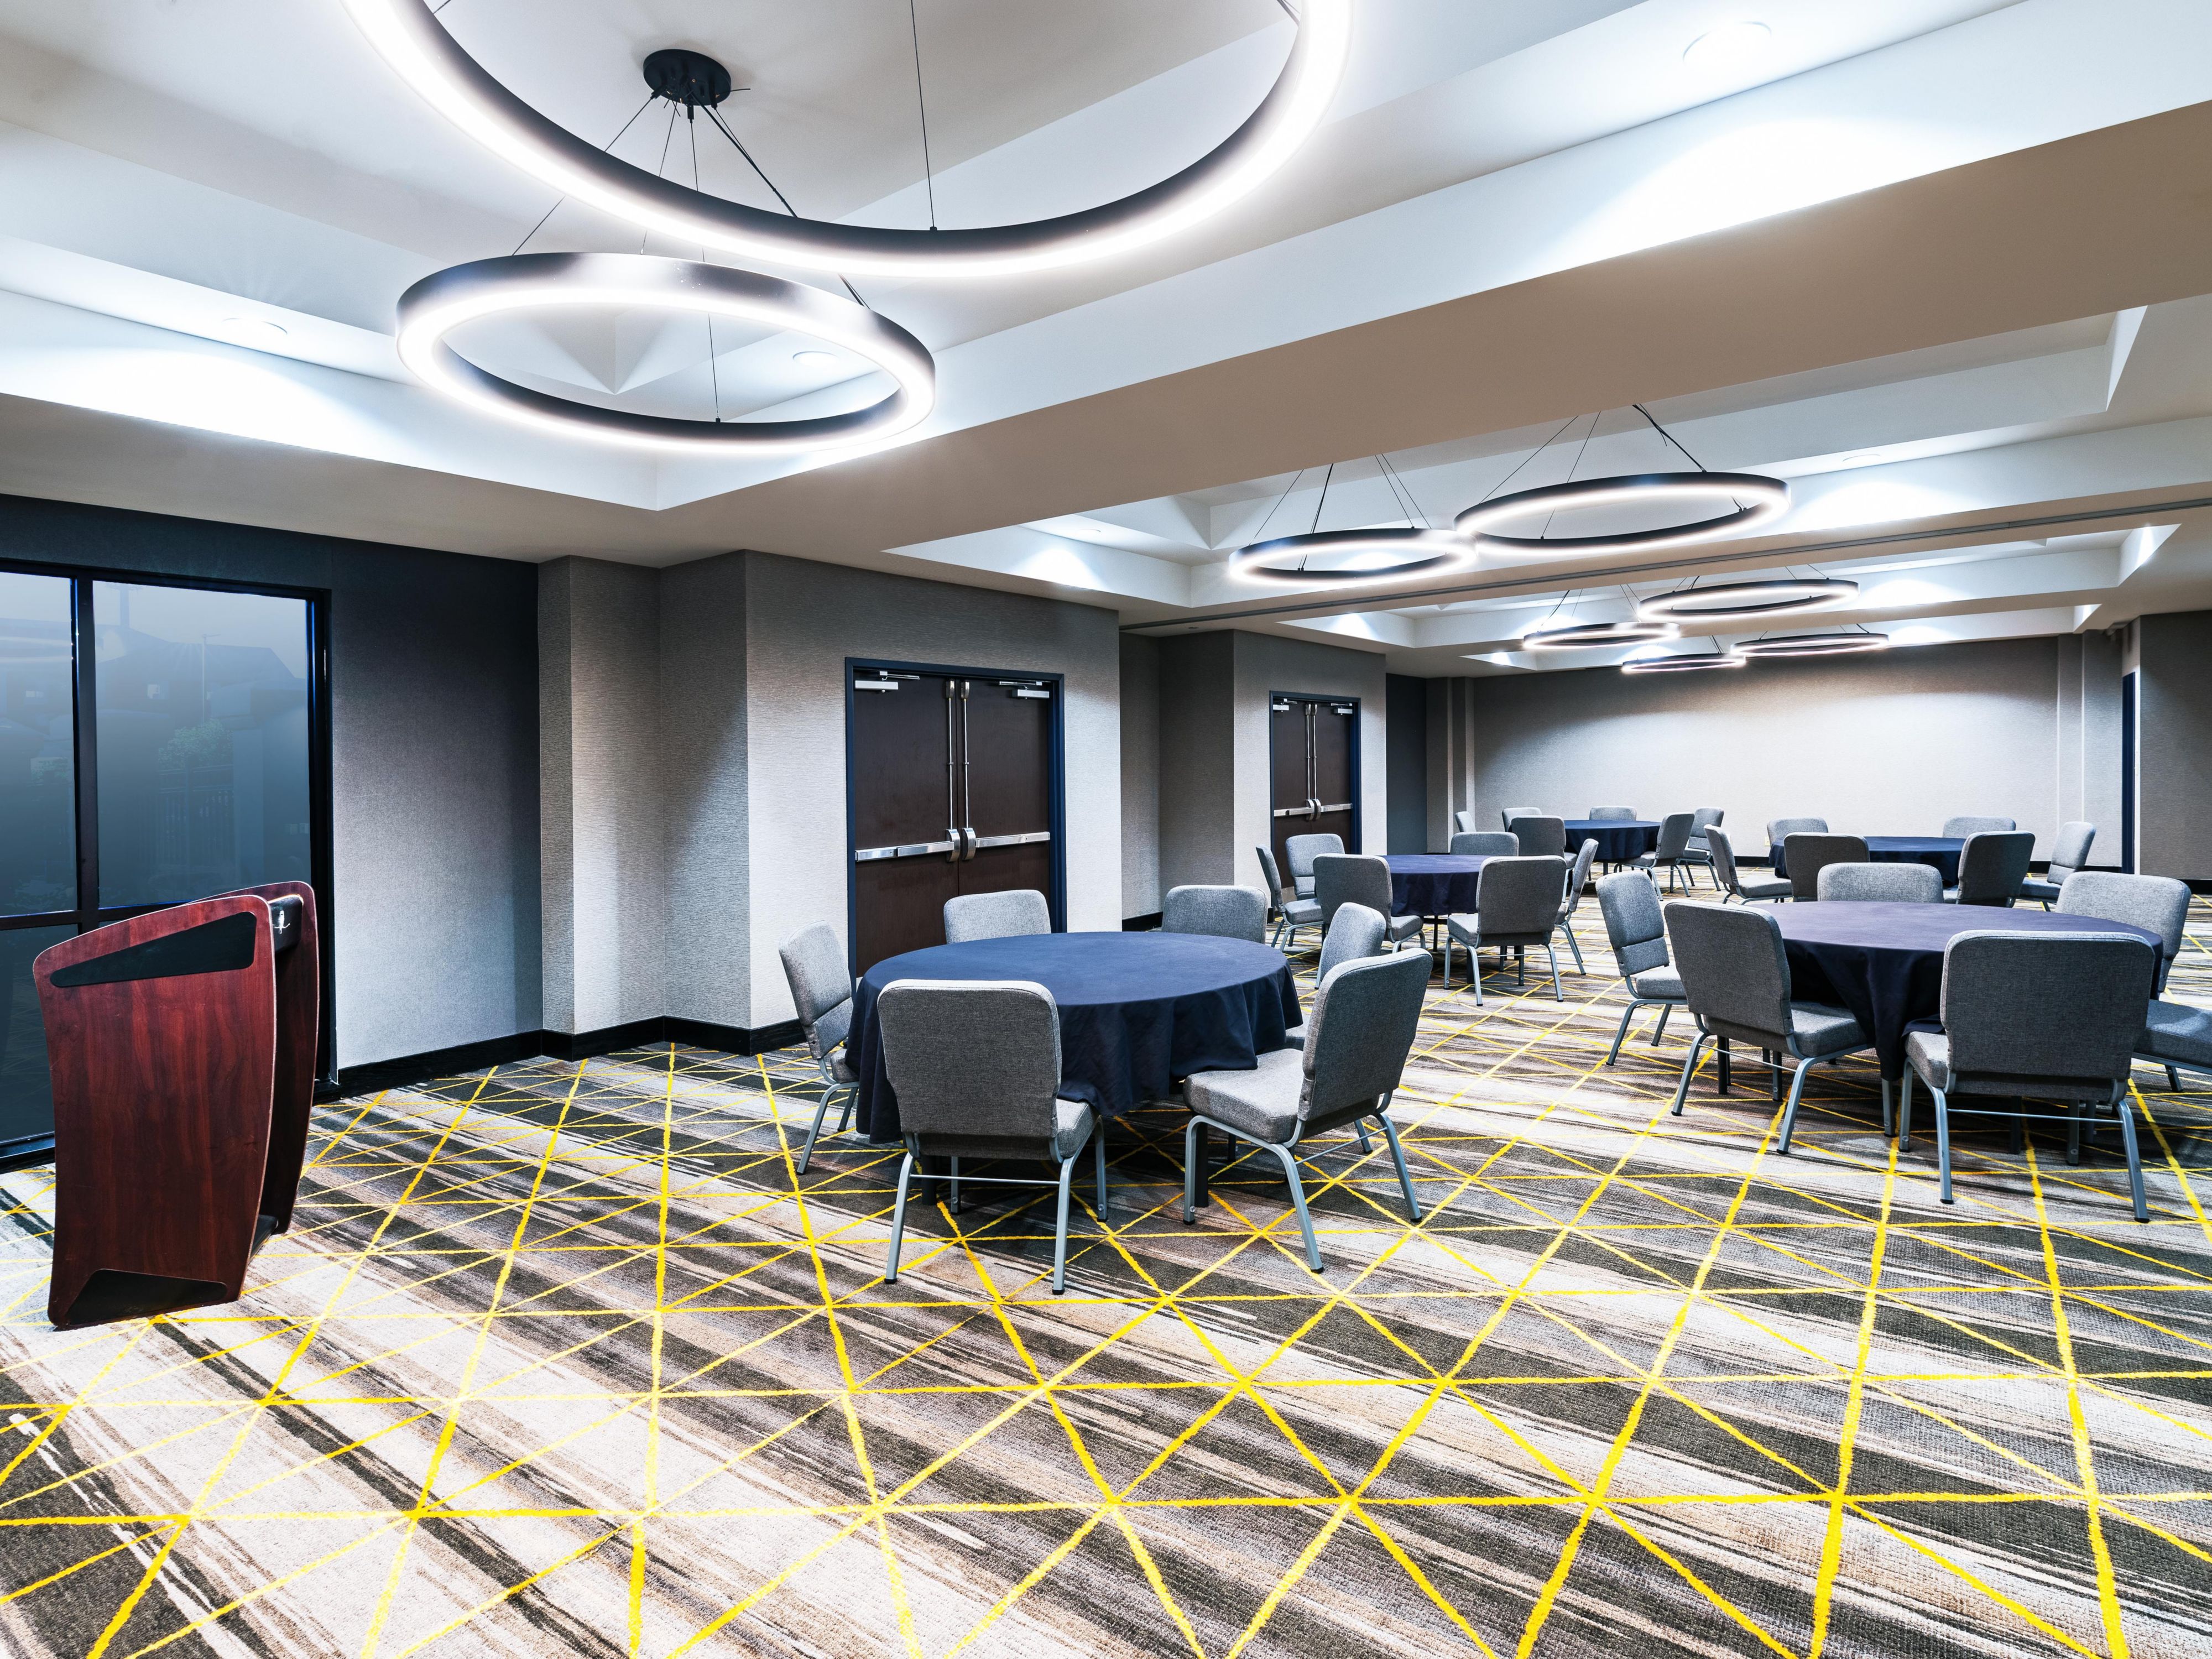 From sports teams to family reunions, we love a good gathering. Let us help with all the details, so you can get ready to play or get ready to celebrate! Our event space is flexible and can also accommodate business meetings or corporate events too.